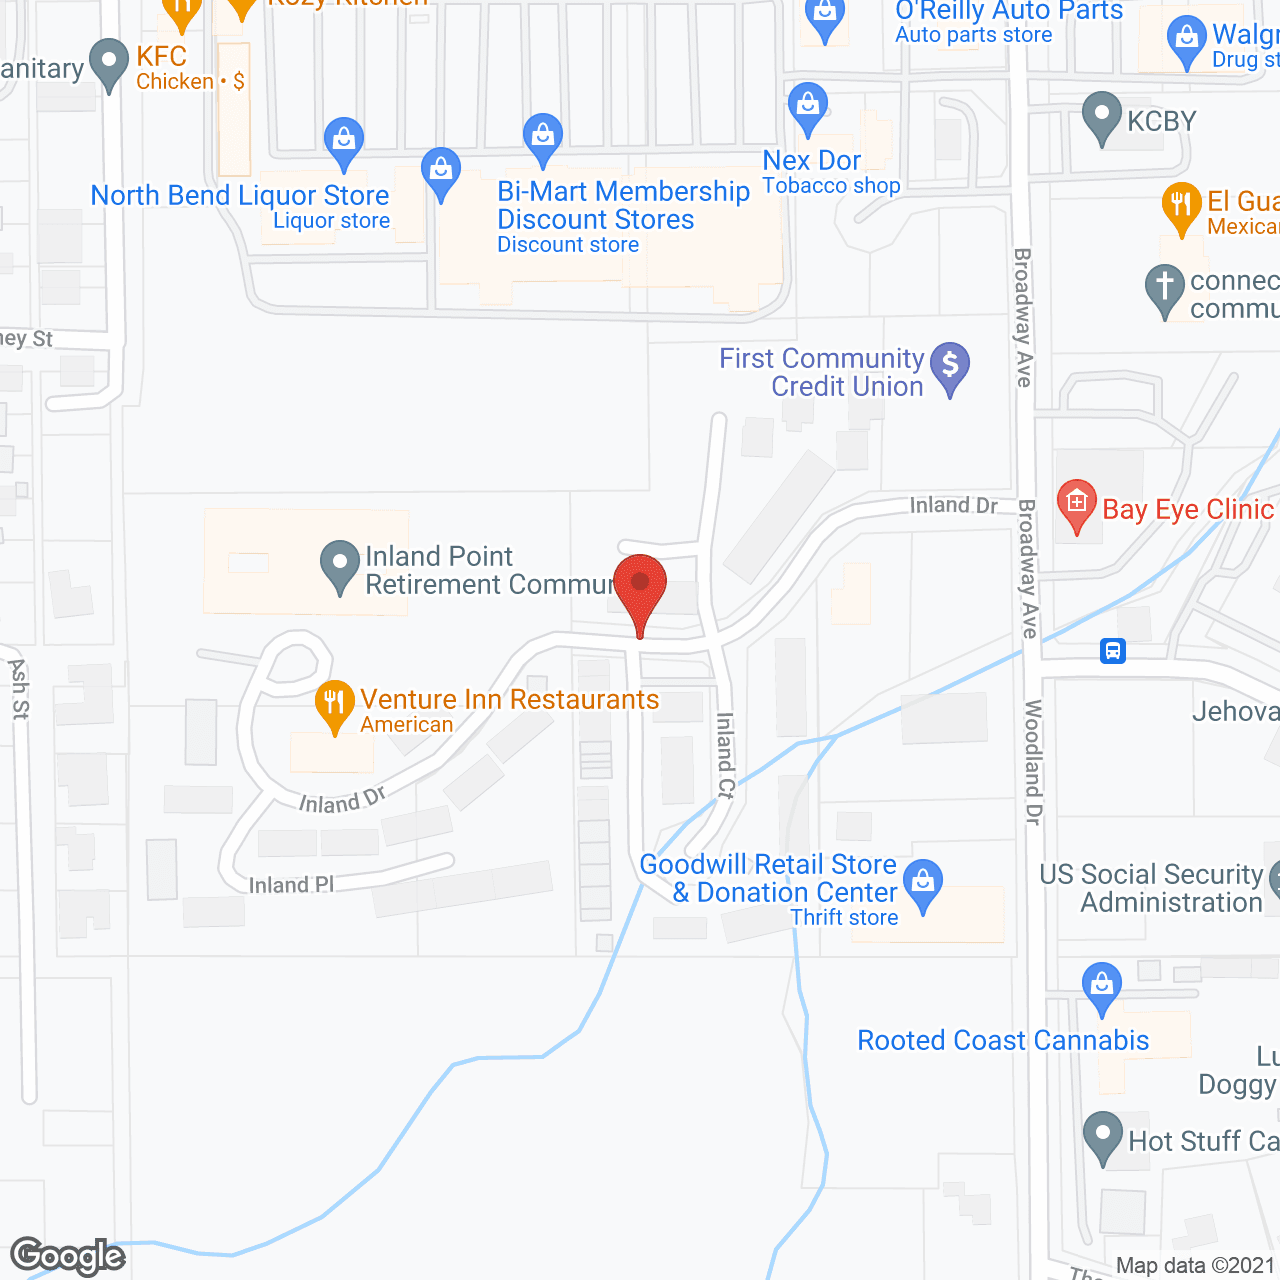 Inland Point Retirement Community in google map